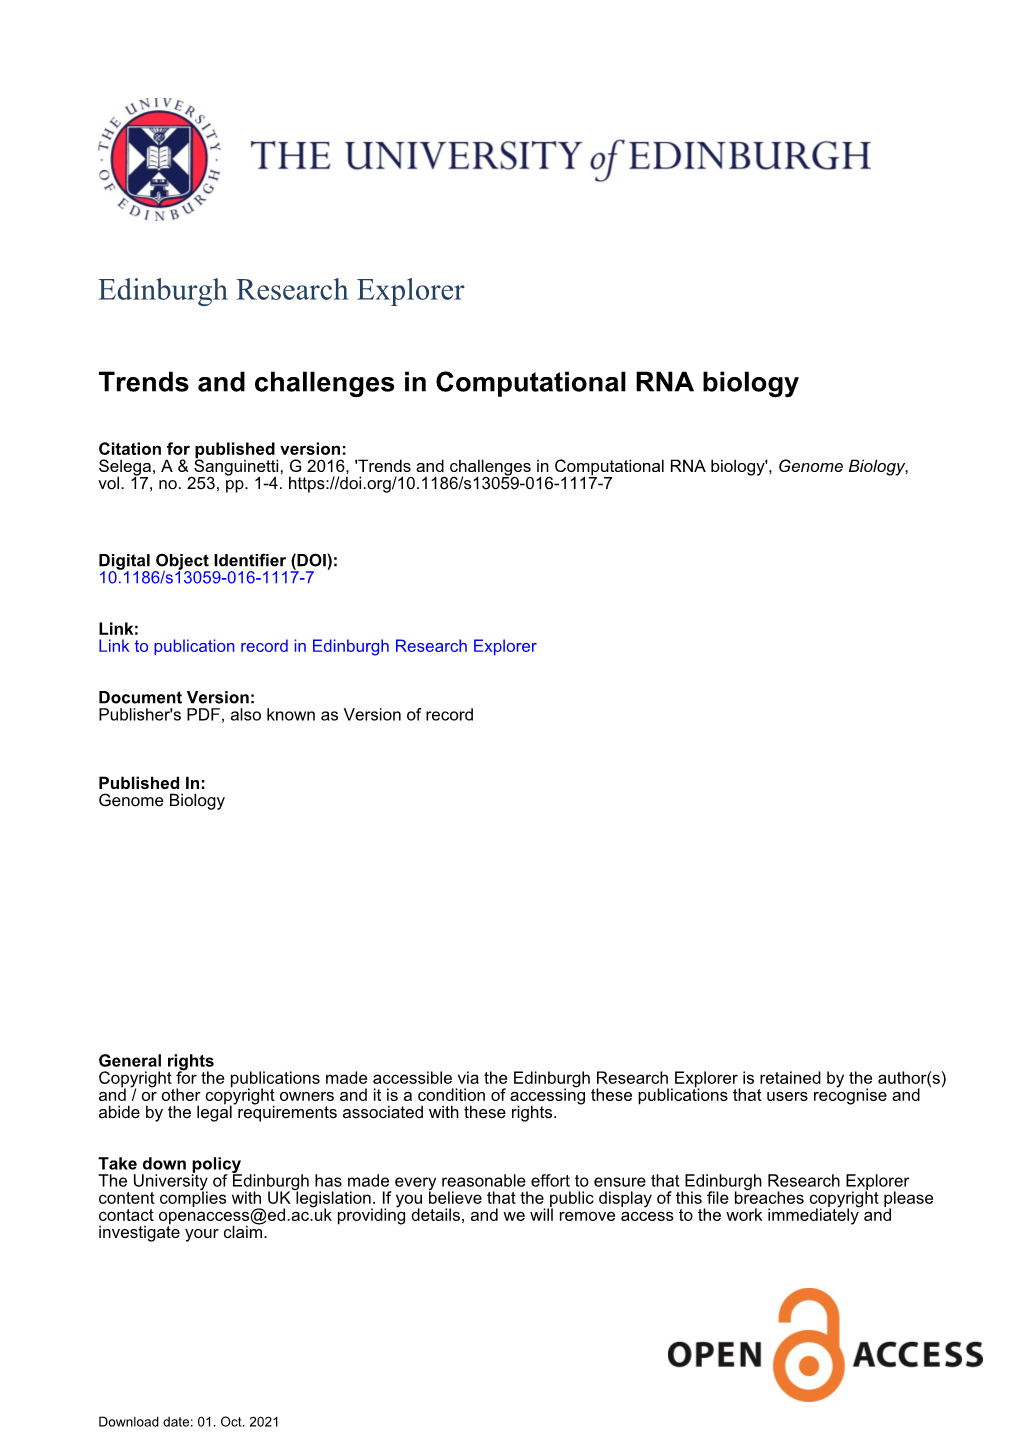 Trends and Challenges in Computational RNA Biology